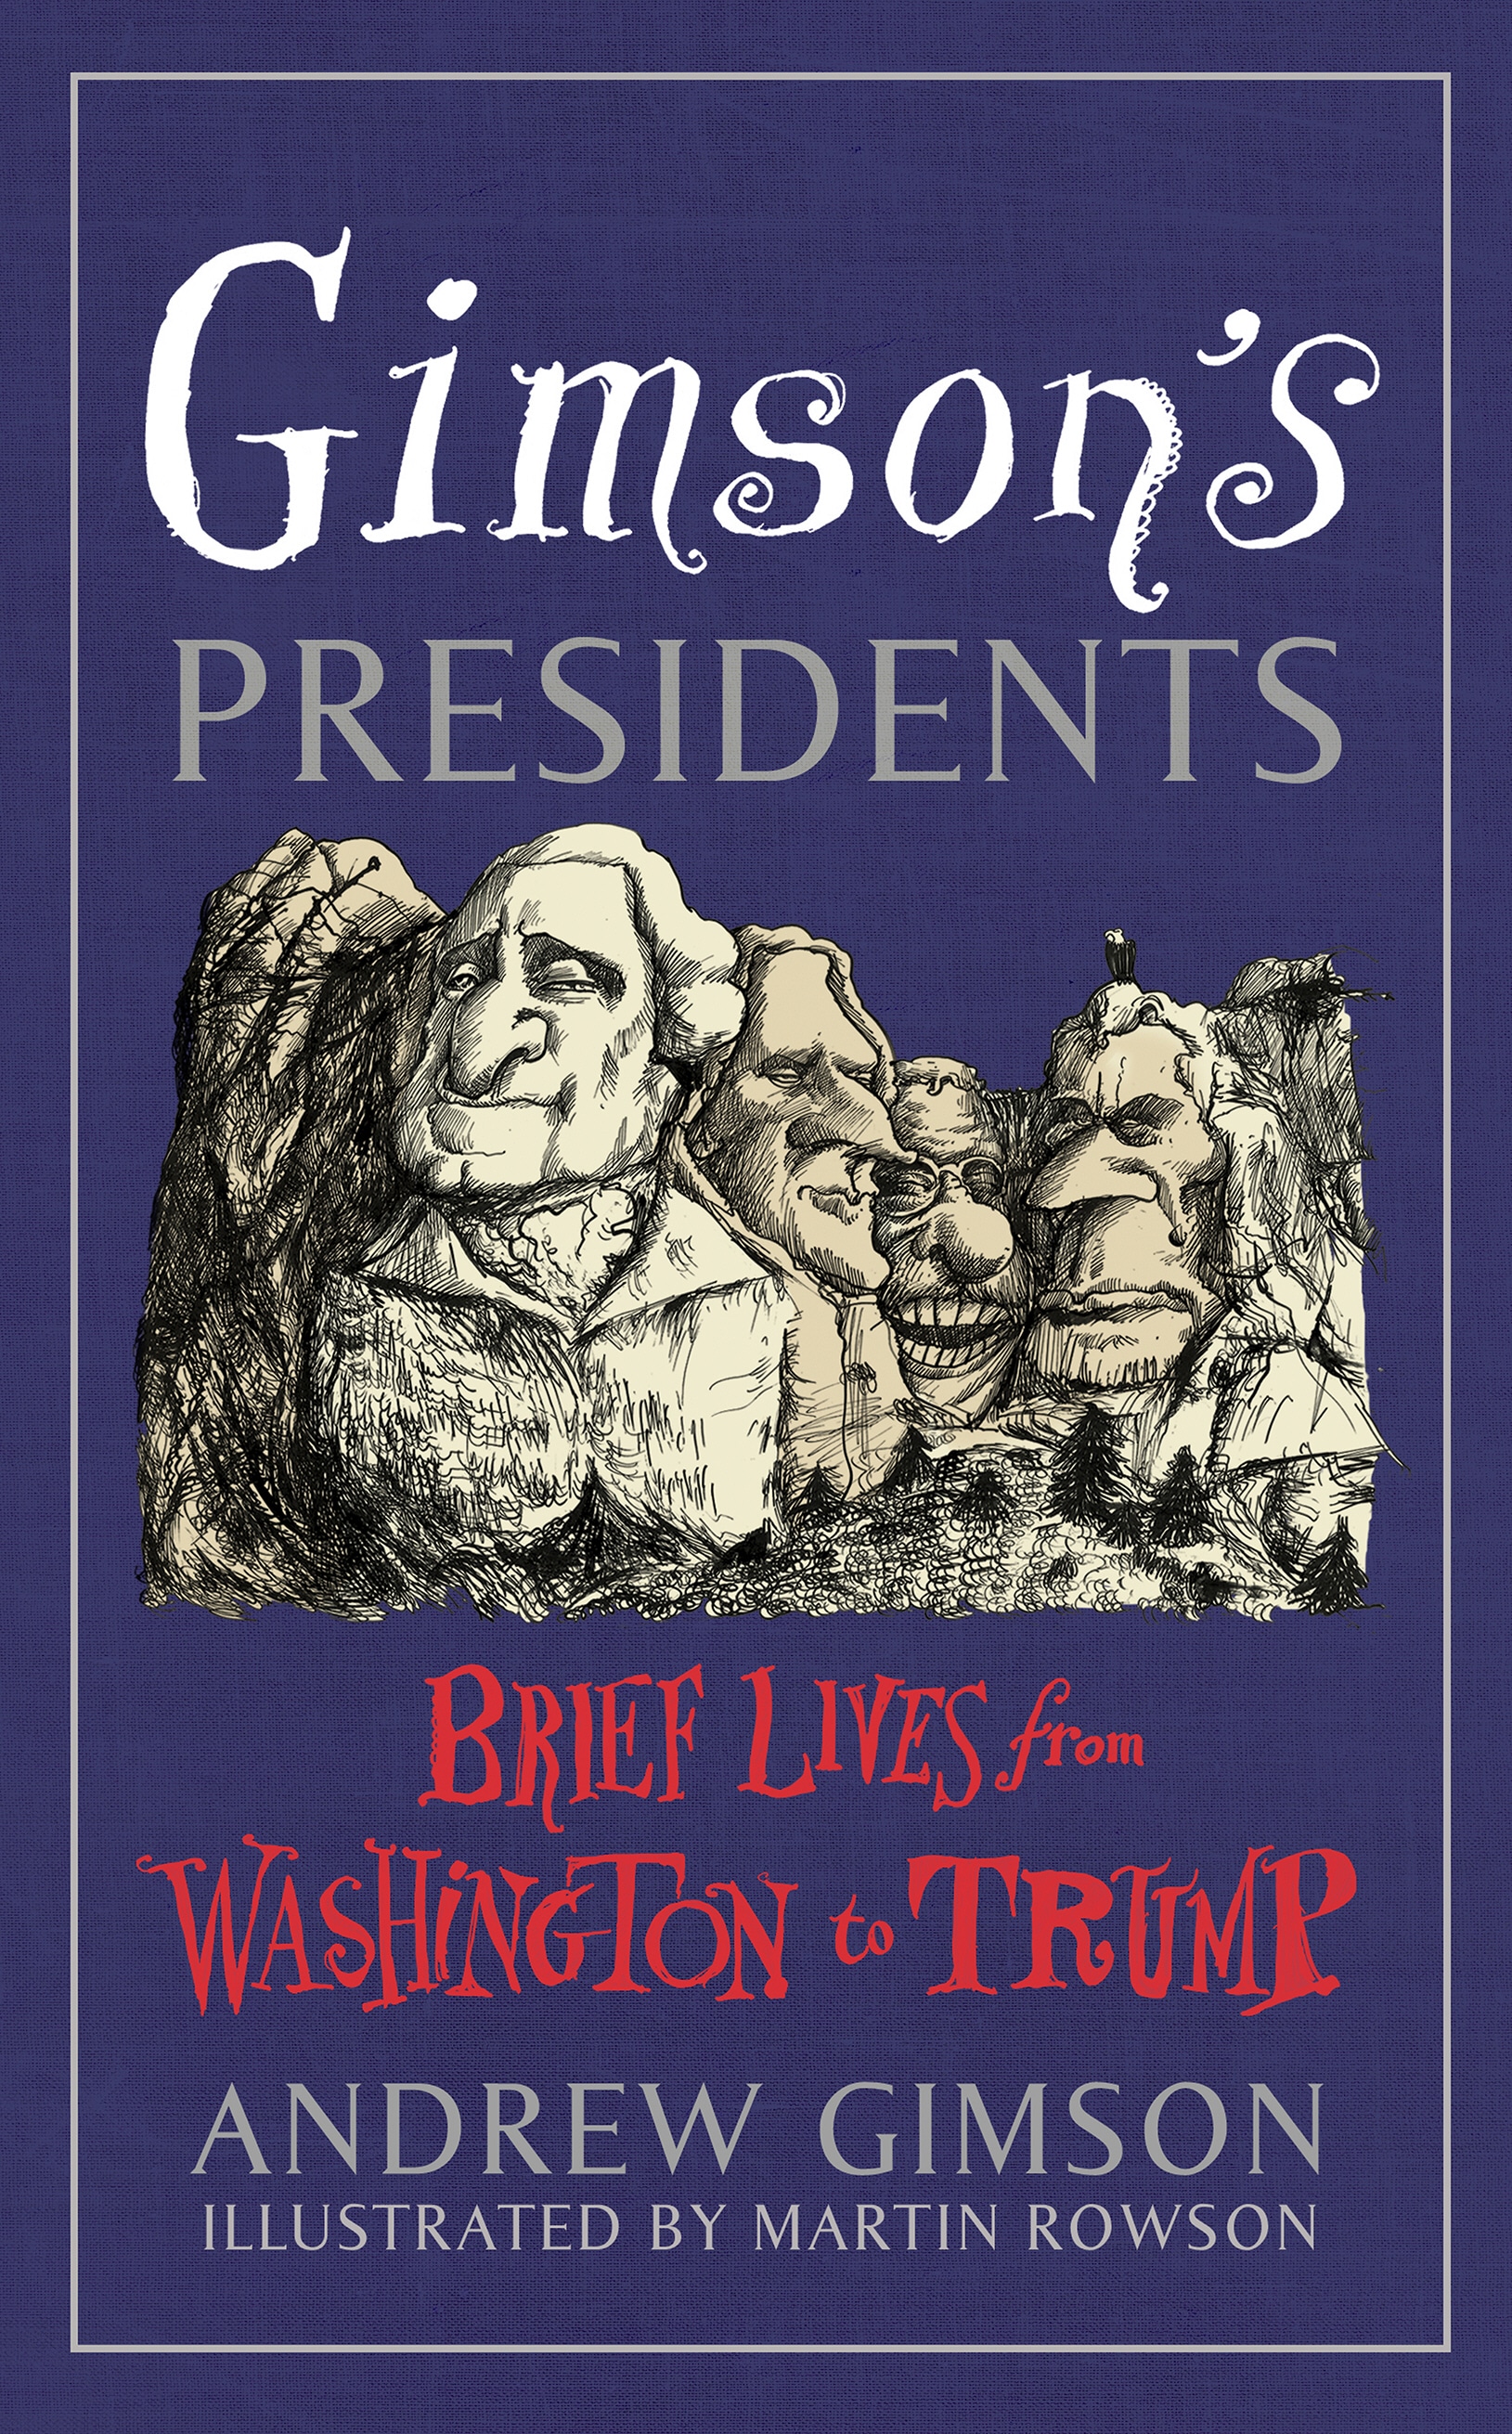 Book “Gimson's Presidents” by Andrew Gimson — March 5, 2020